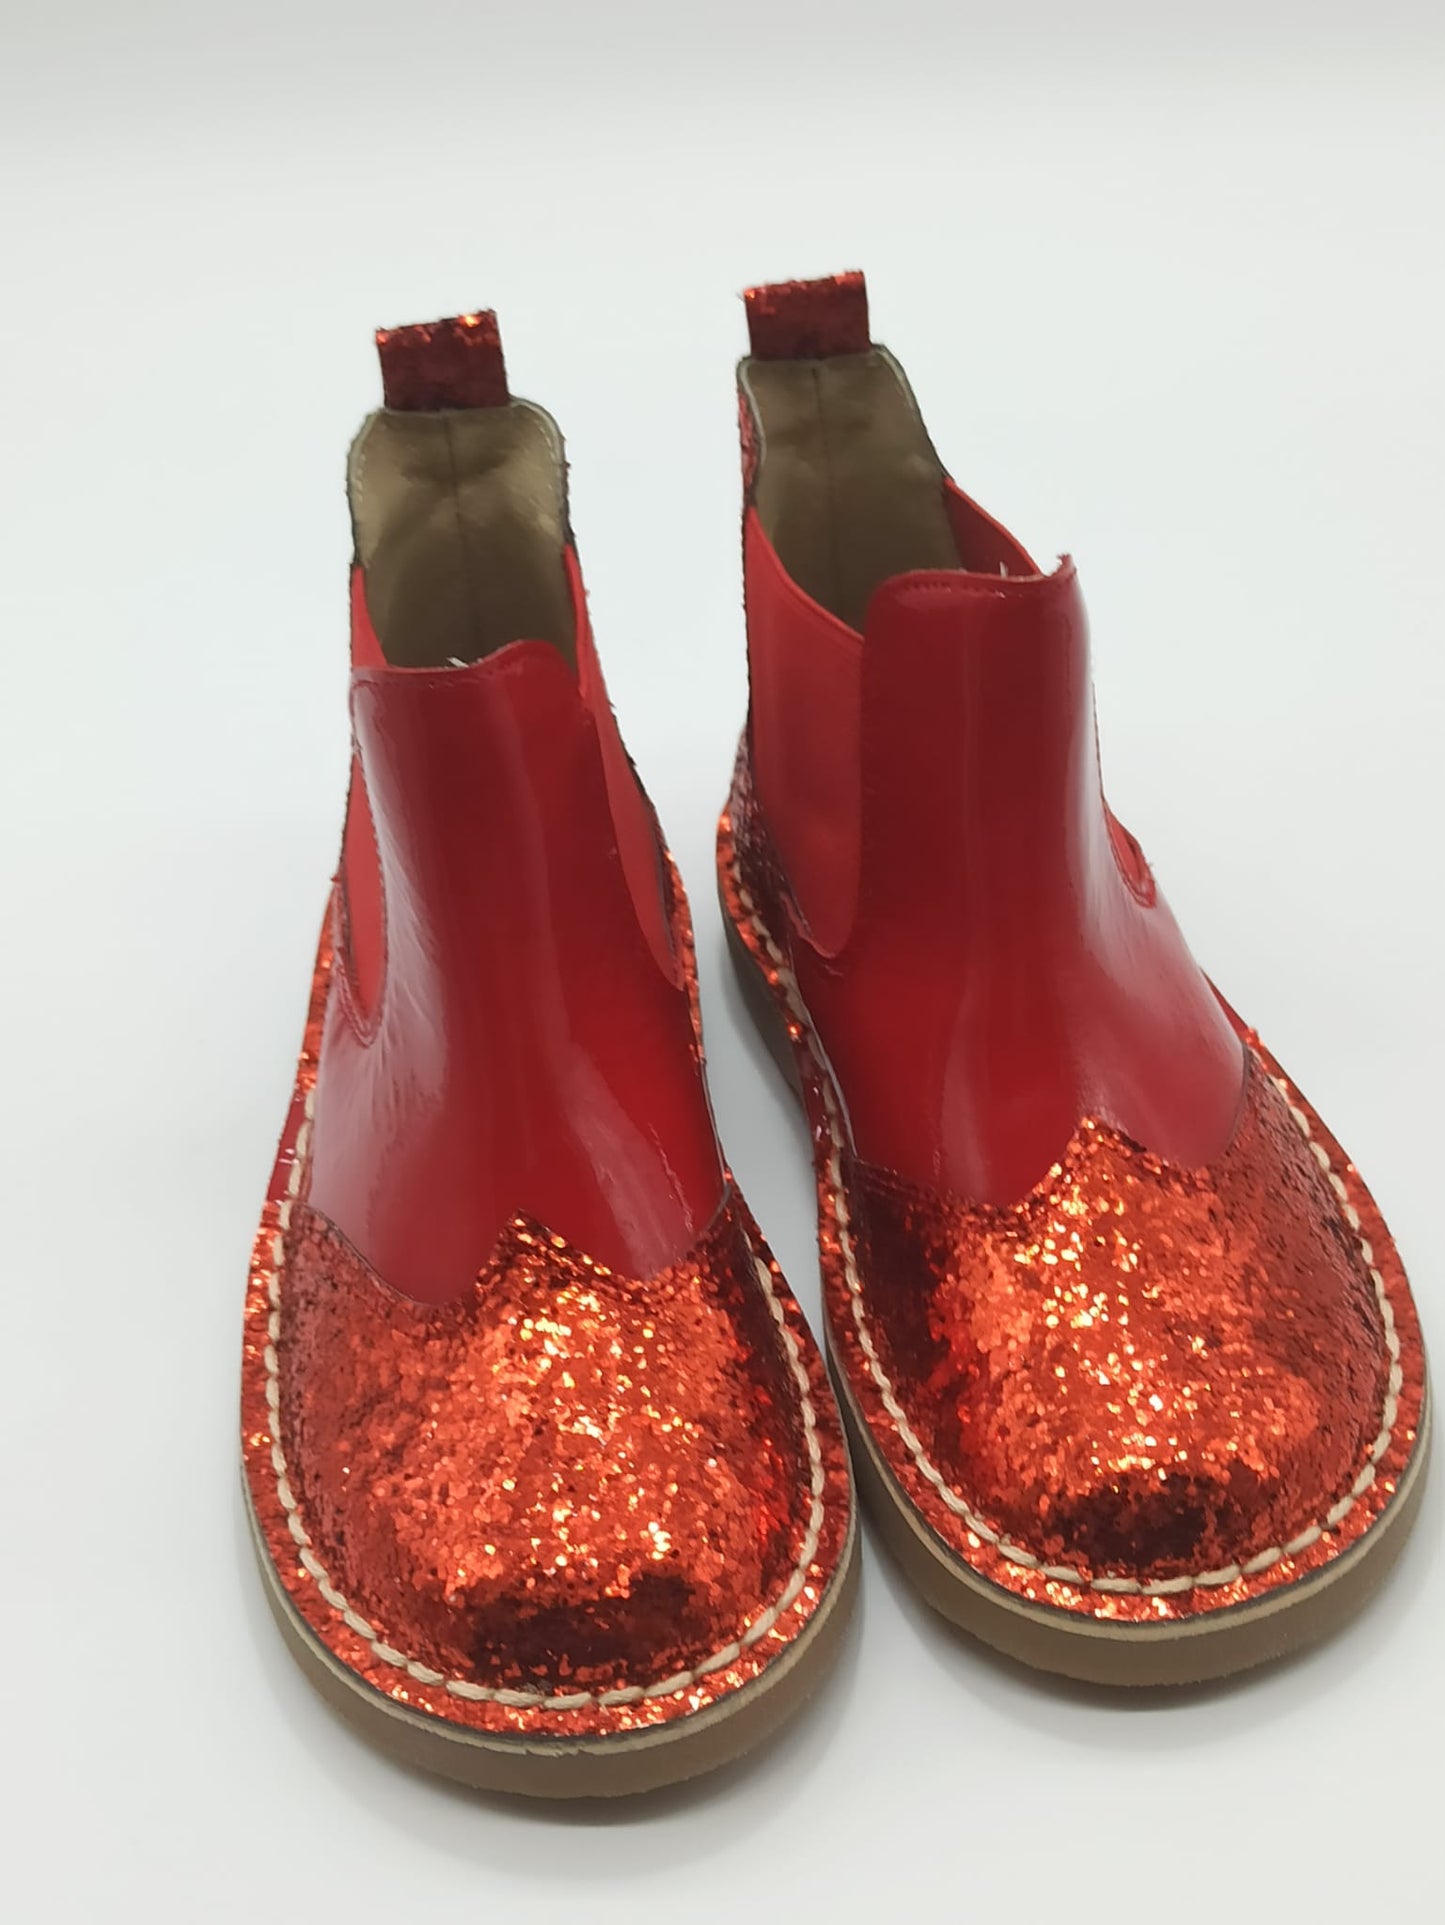 6301 Red Glitter Chelsea Boot - Fallons Toys&Shoes - Fallons